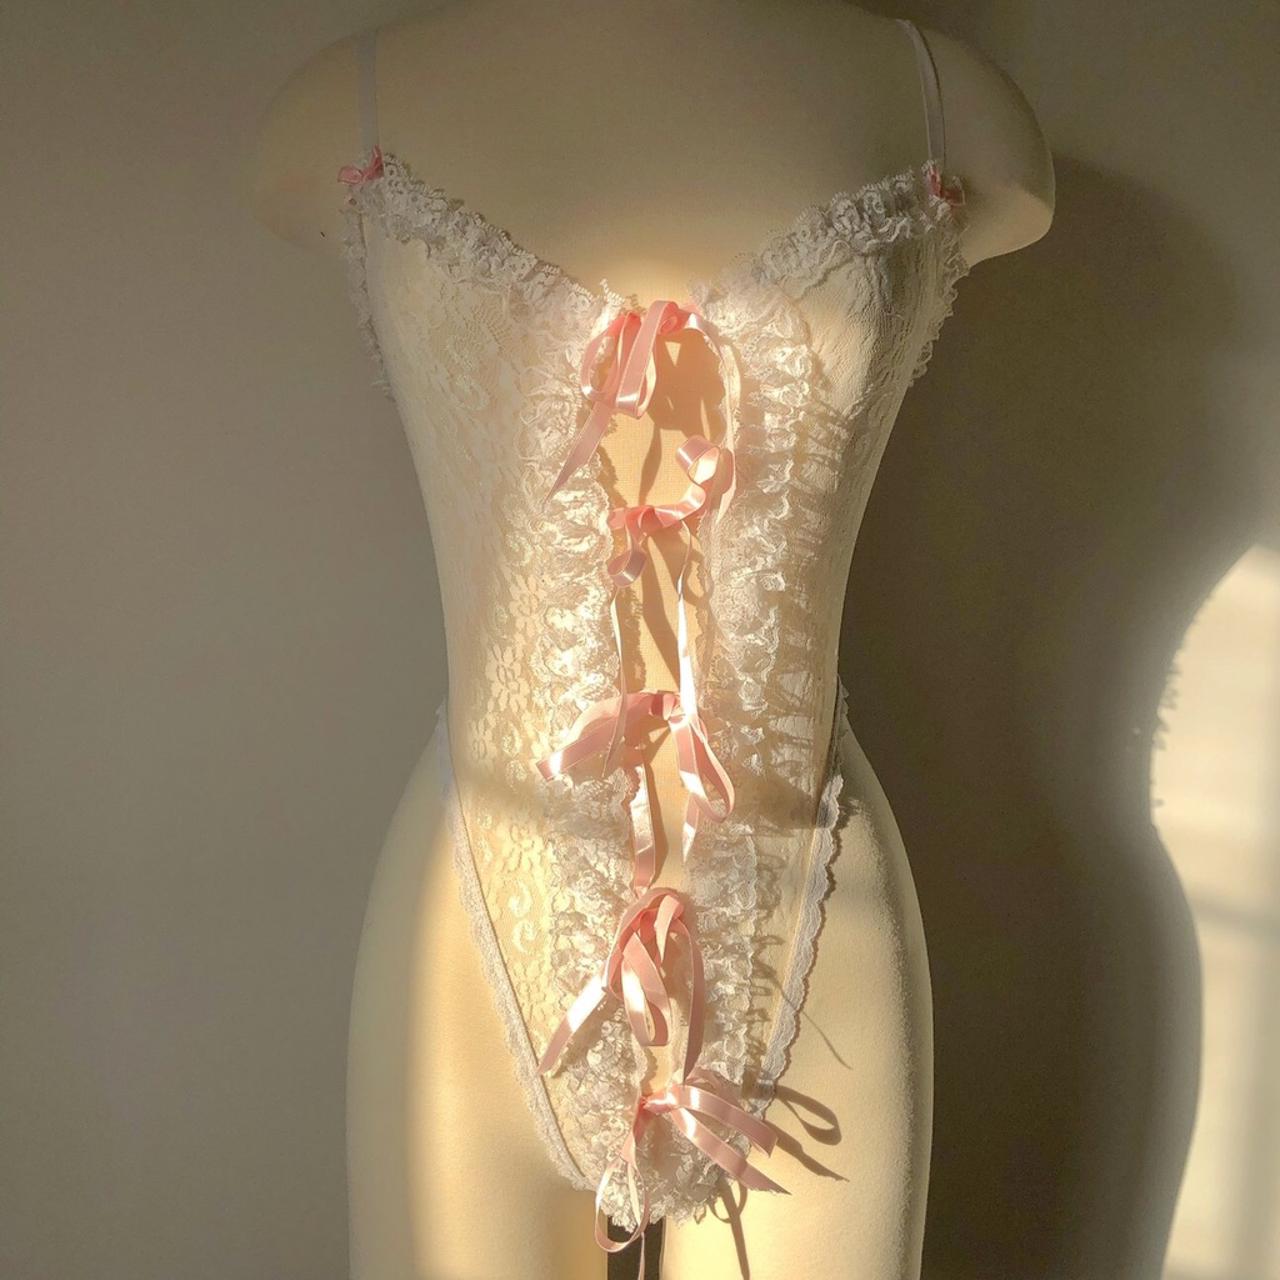 Vintage 90's White Satin And Lace Teddy Lingerie - Depop